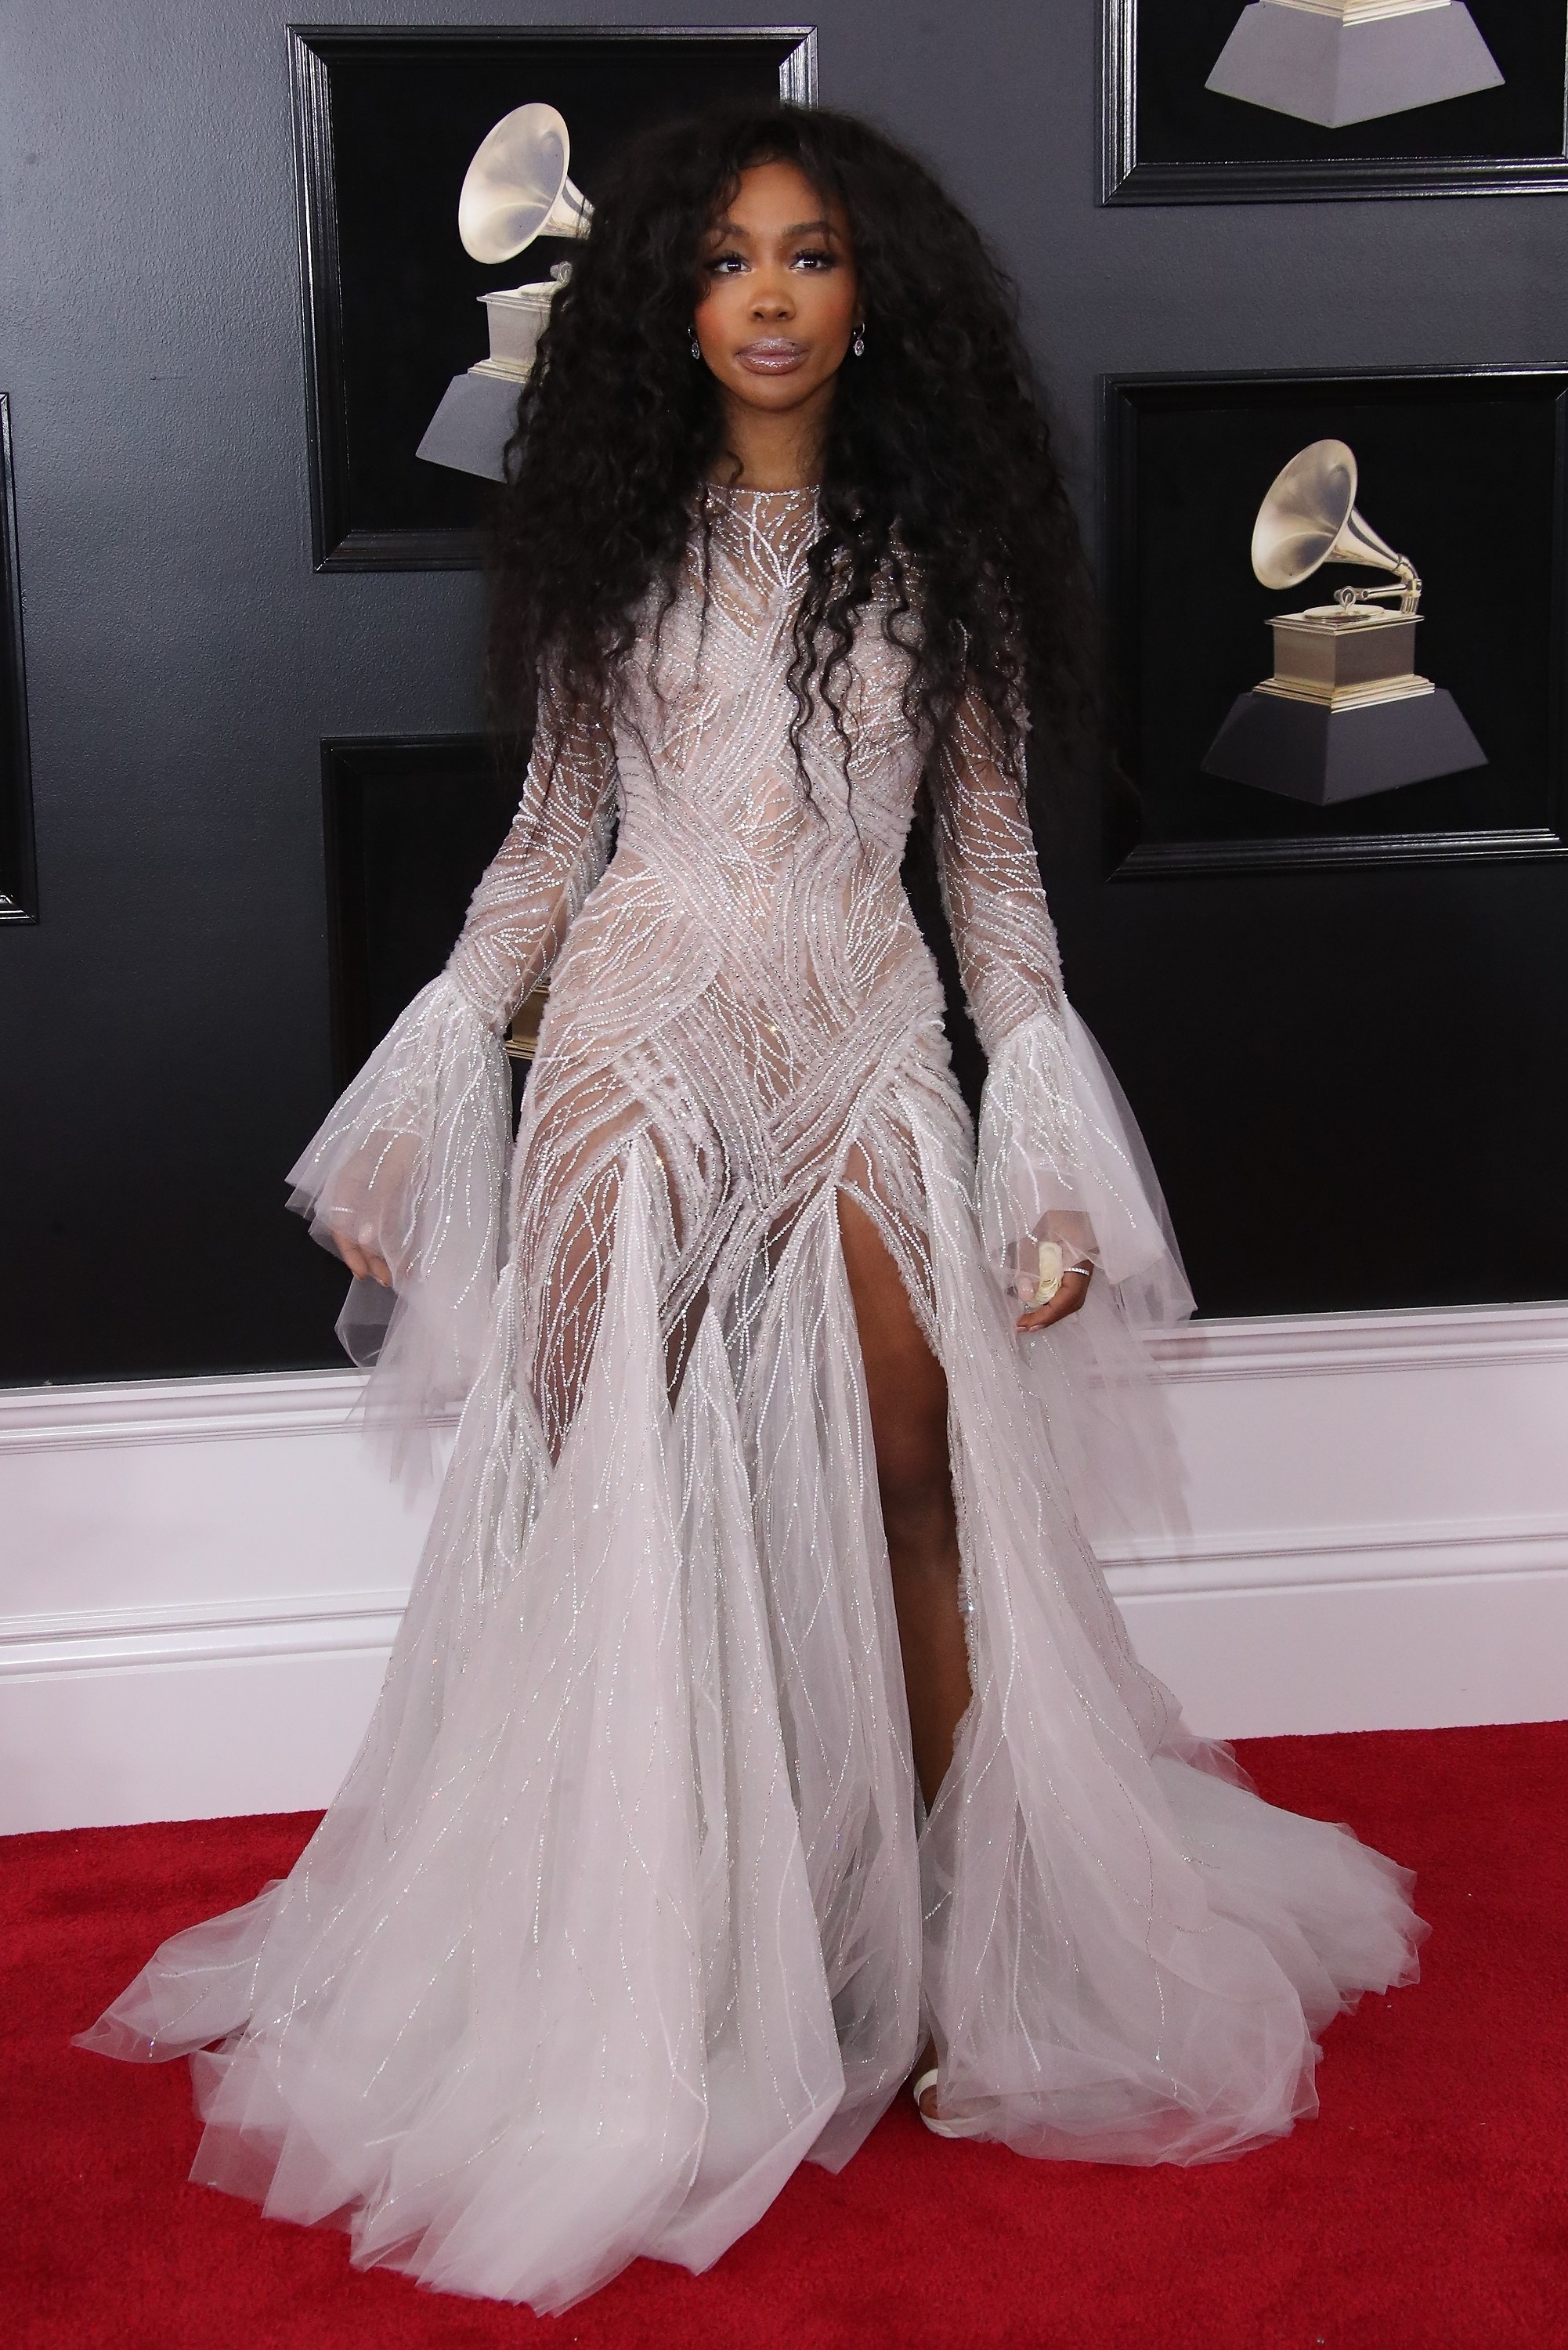 SZA arrives at the 60th Annual GRAMMY Awards at Madison Square Garden on January 28, 2018